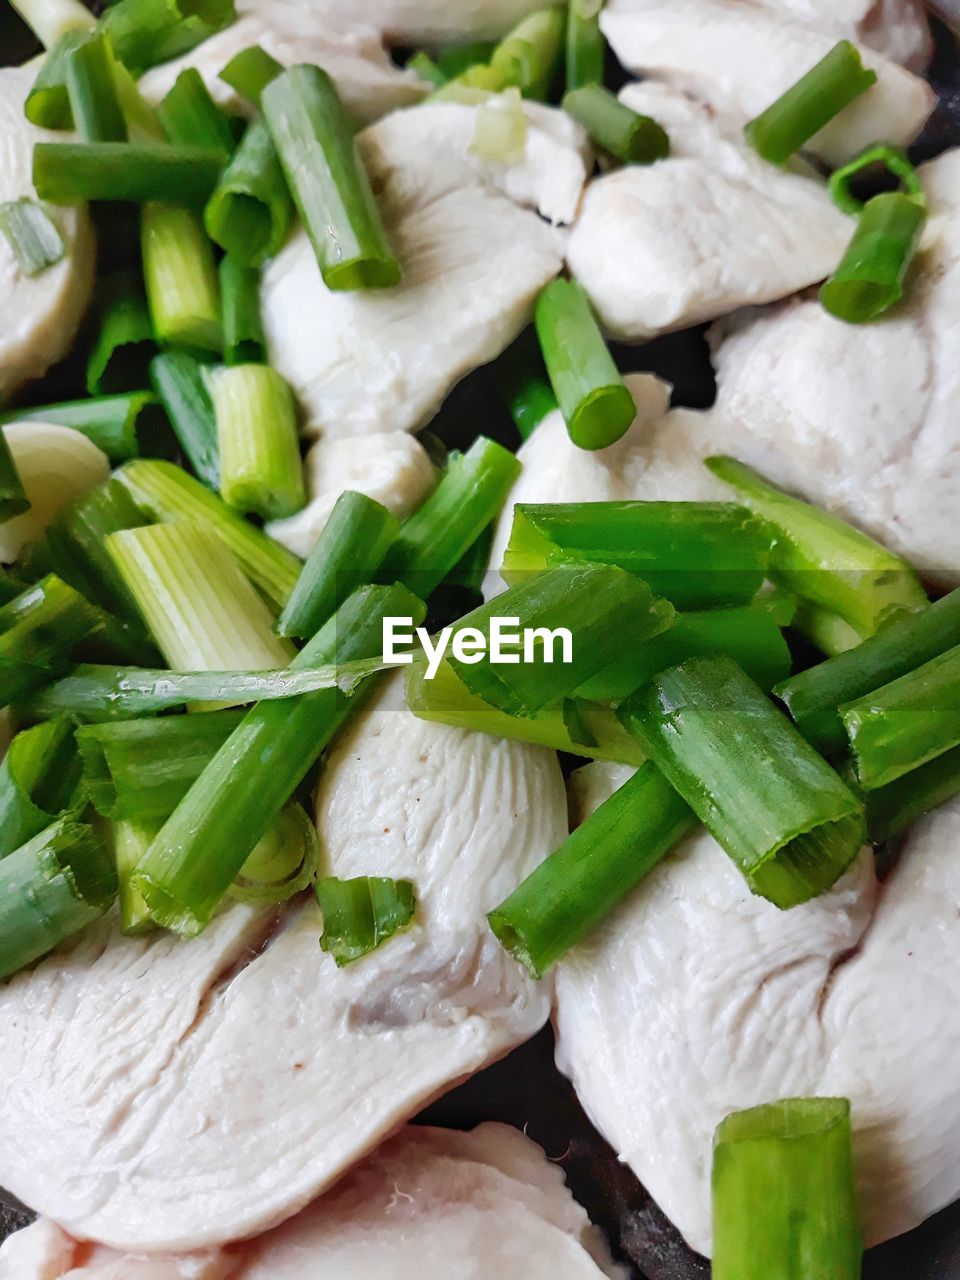 Full frame shot of chopped spring onions
with white chicken fillet. white meat with scallion